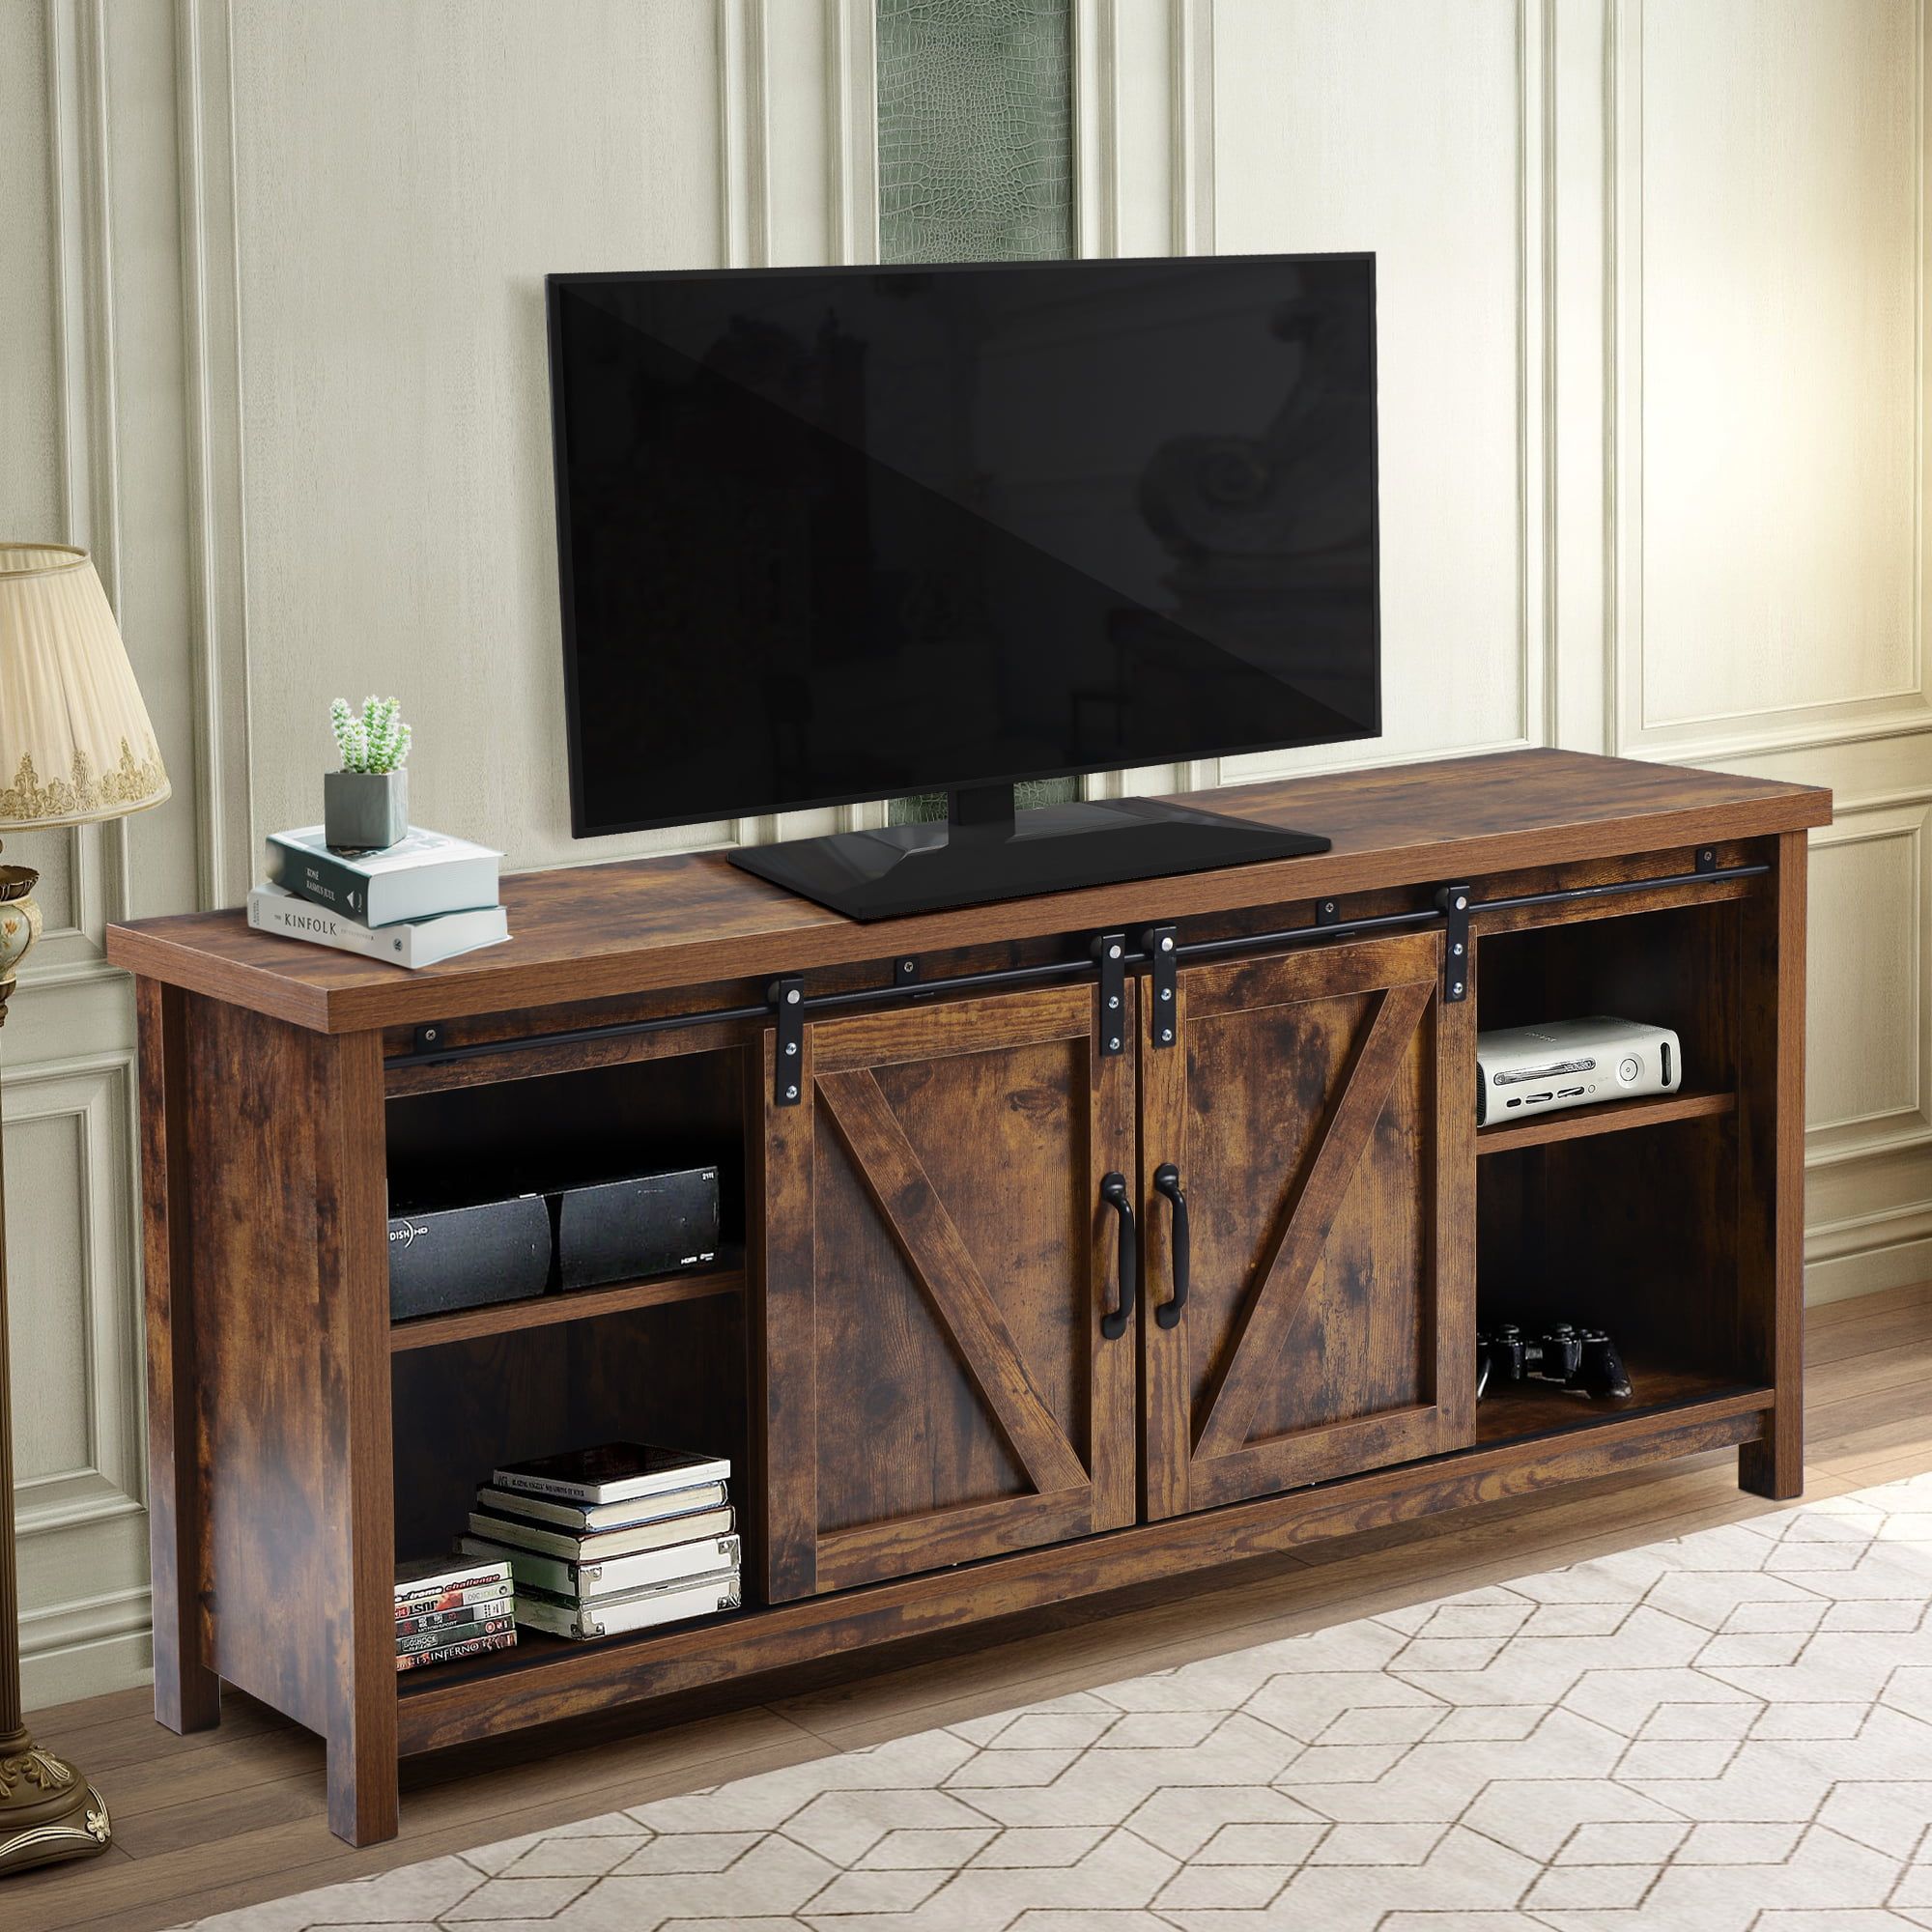 Buy Farmhouse 52'' Tv Stands With Adjustable Leg, Segmart Traditional With Regard To Farmhouse Rattan Tv Stands (Gallery 19 of 20)